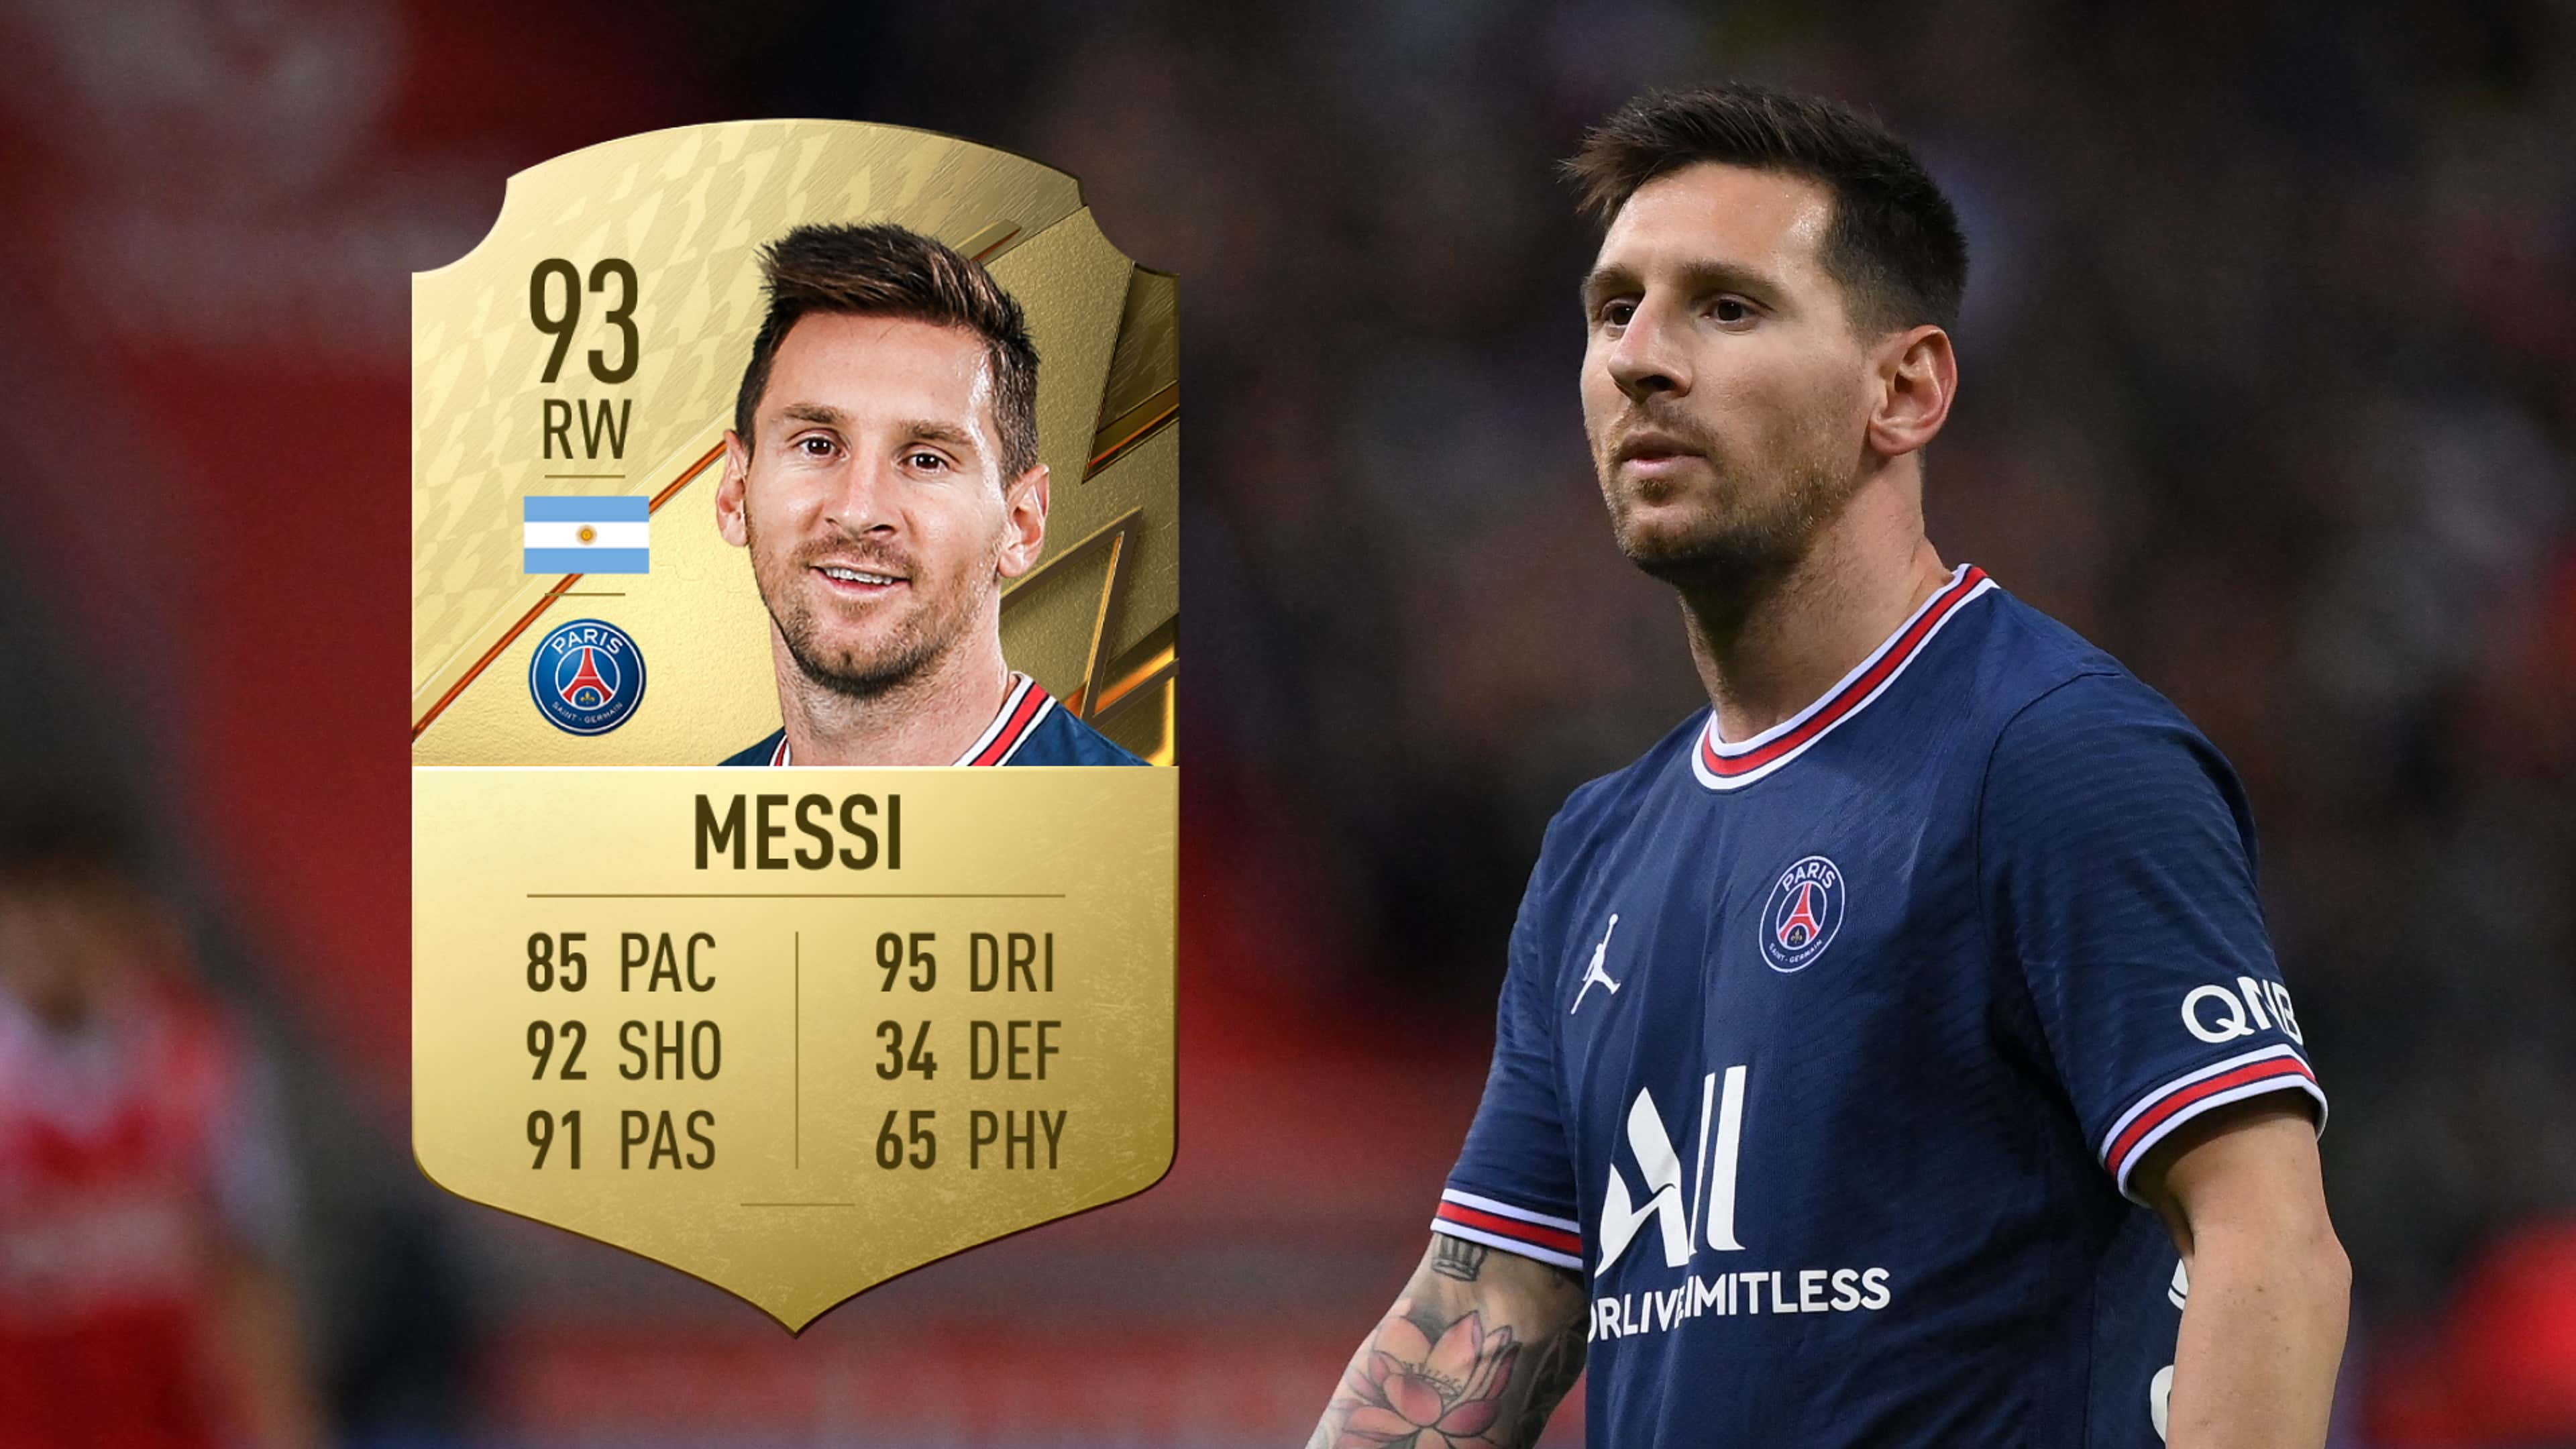 FIFA 15 Ultimate Team: 10 ways it drives us crazy